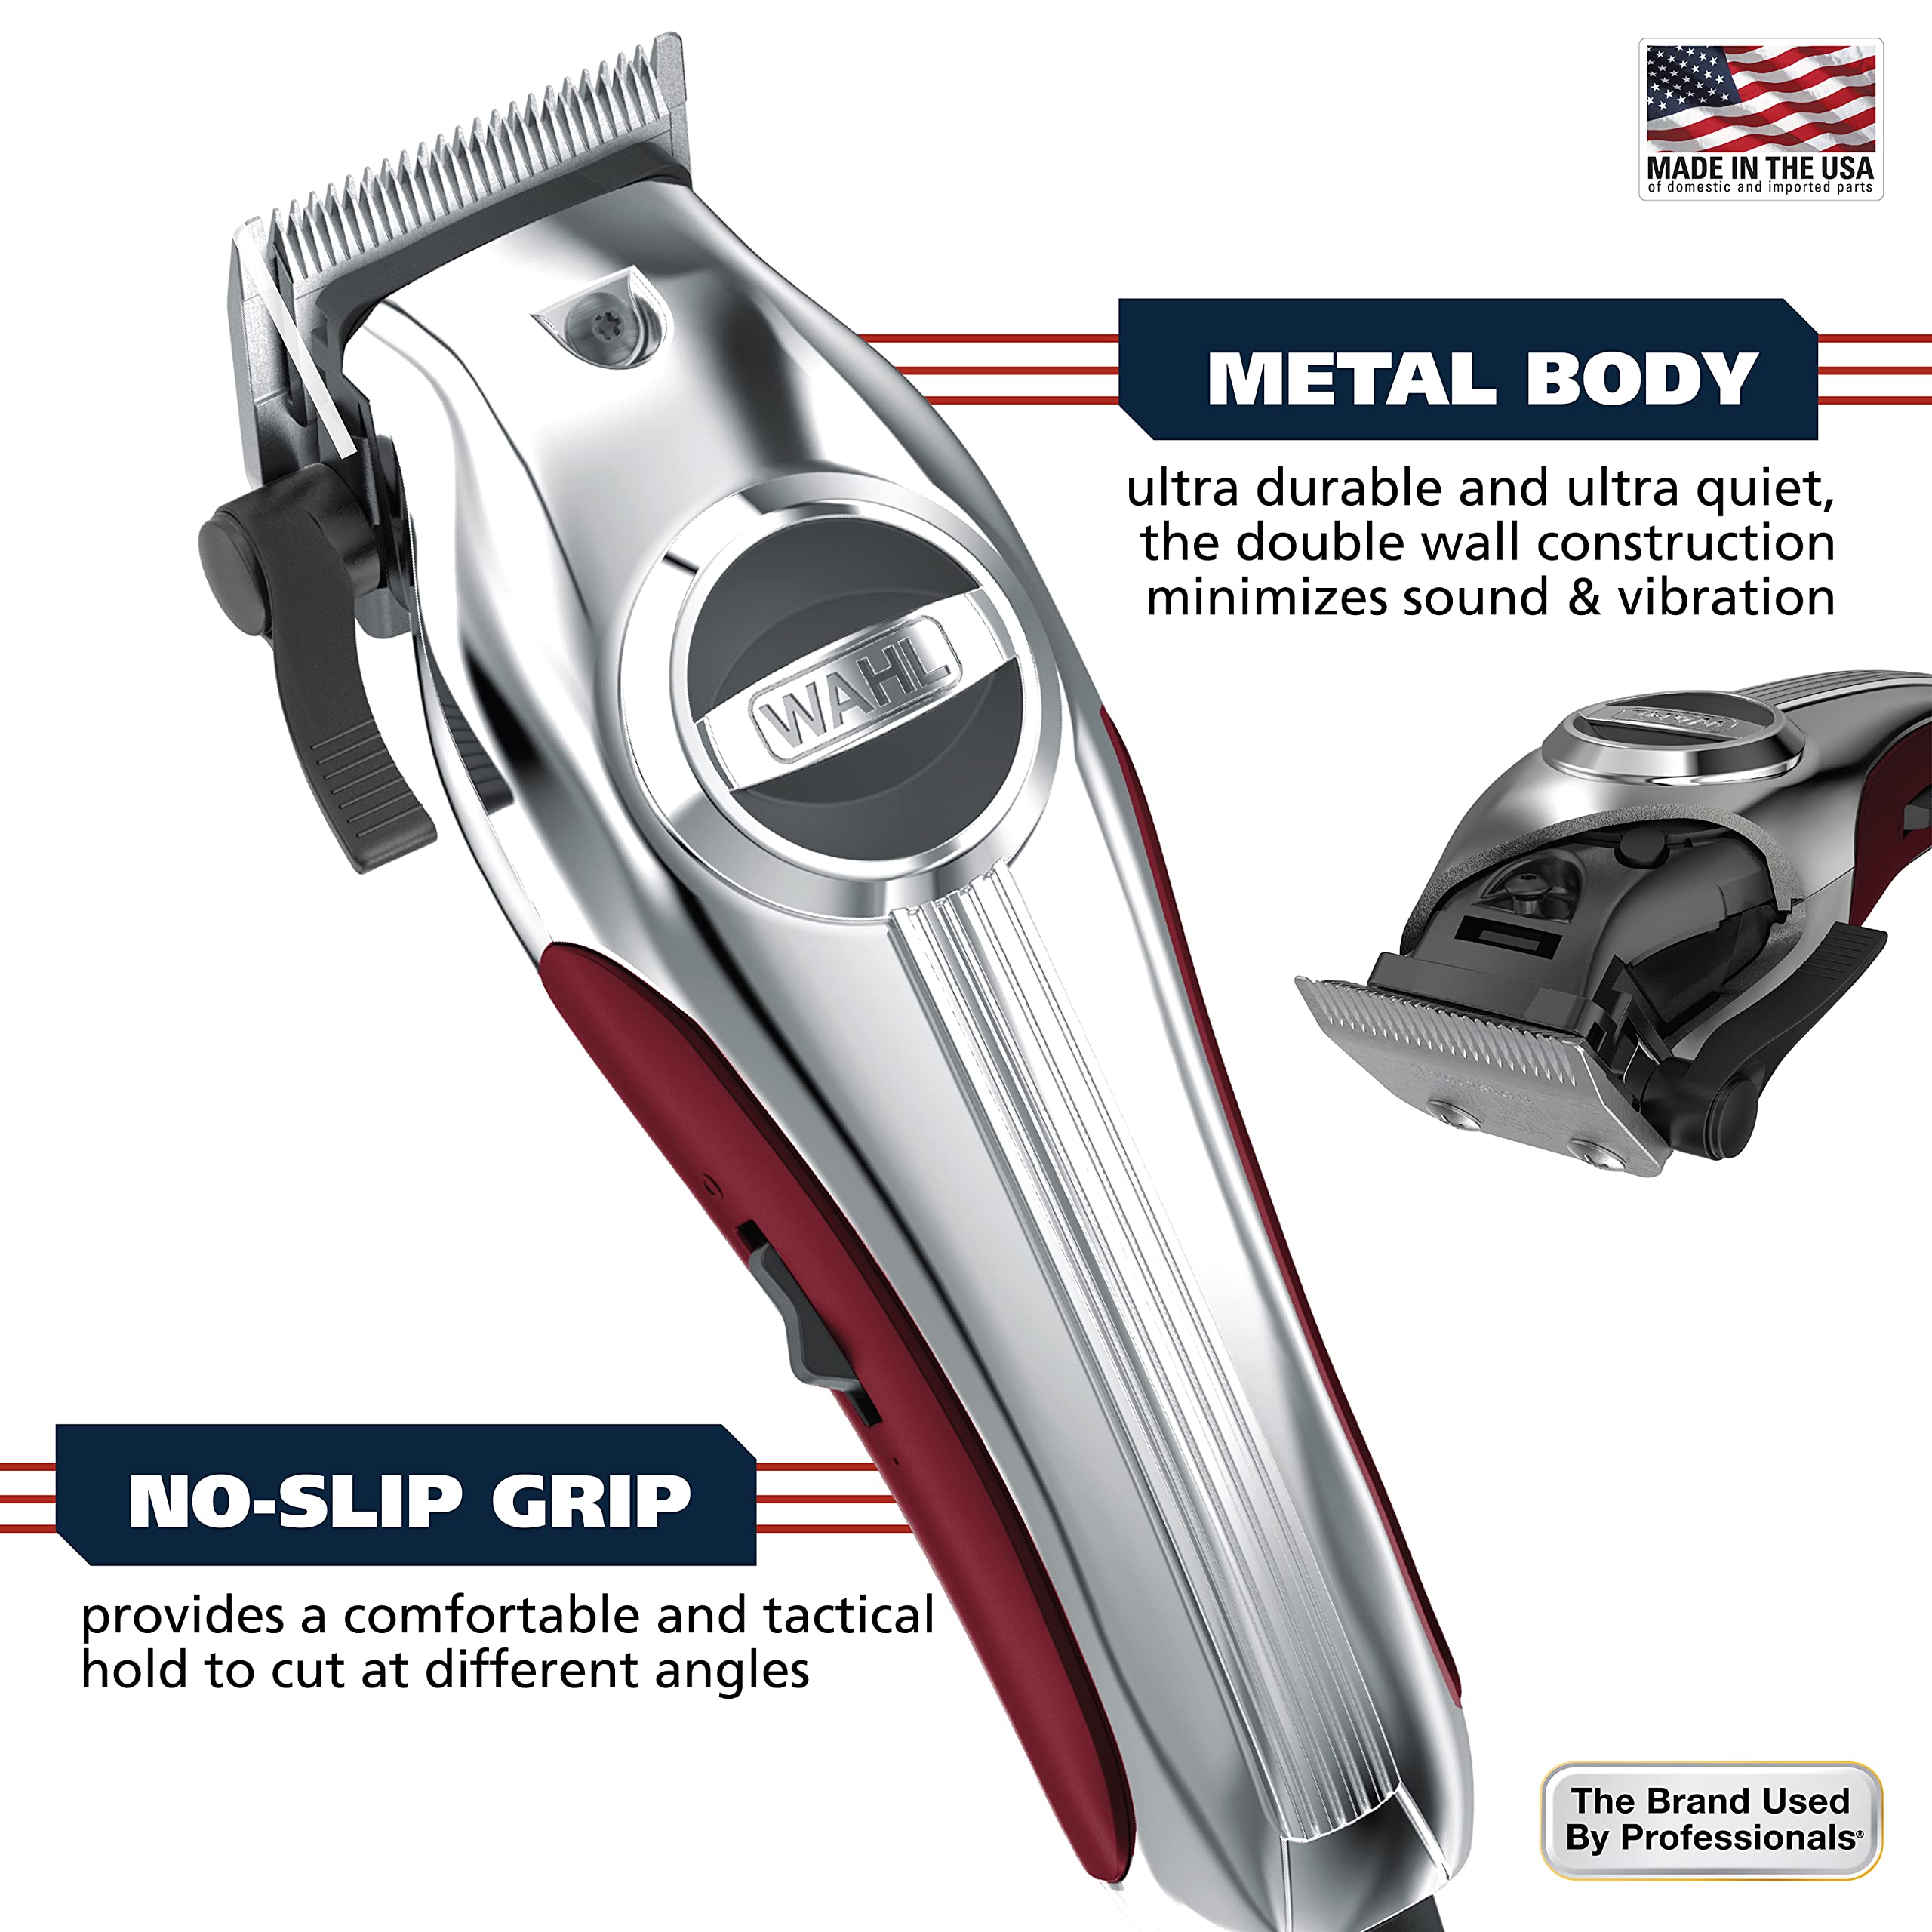 Wahl USA Metal Corded Clipper Kit with Double Insulation for Ultra Quiet Operation and Cooler Operating Temperatures, Metal Housing with Bonus Hair Clipping Guard Caddy - Model 3000097